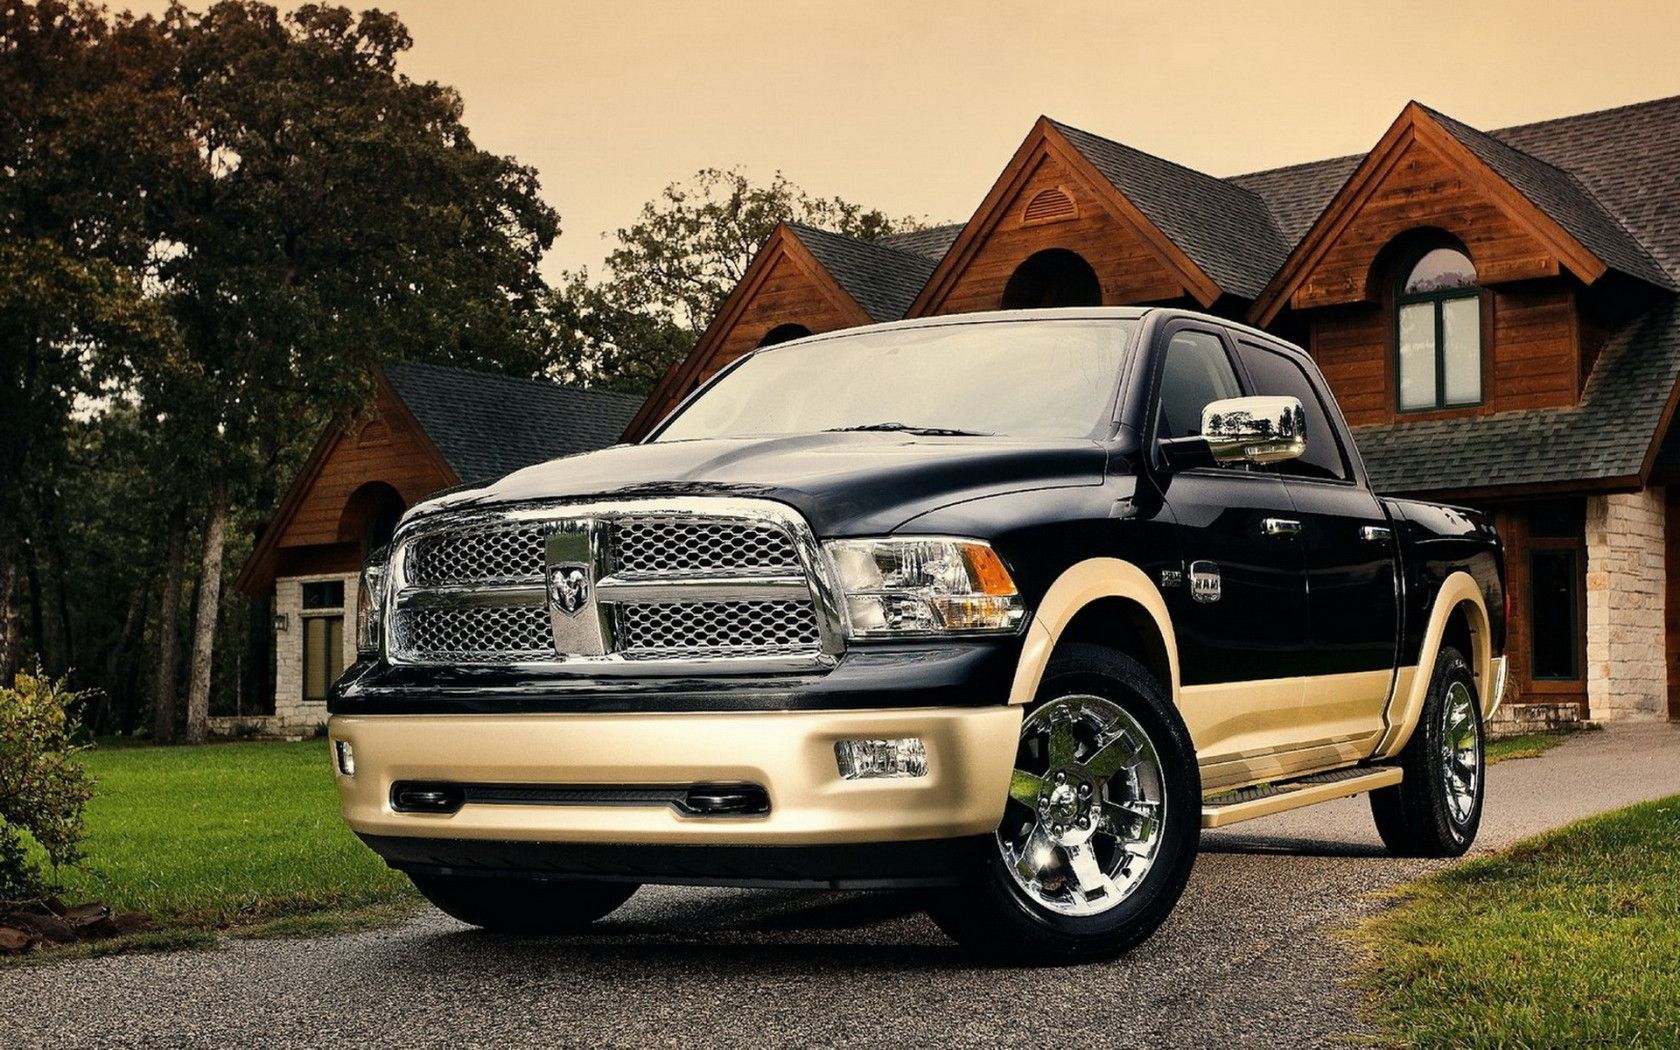 Dodge Ram Laramie Longhorn Wallpapers And Images Wallpapers Dodge